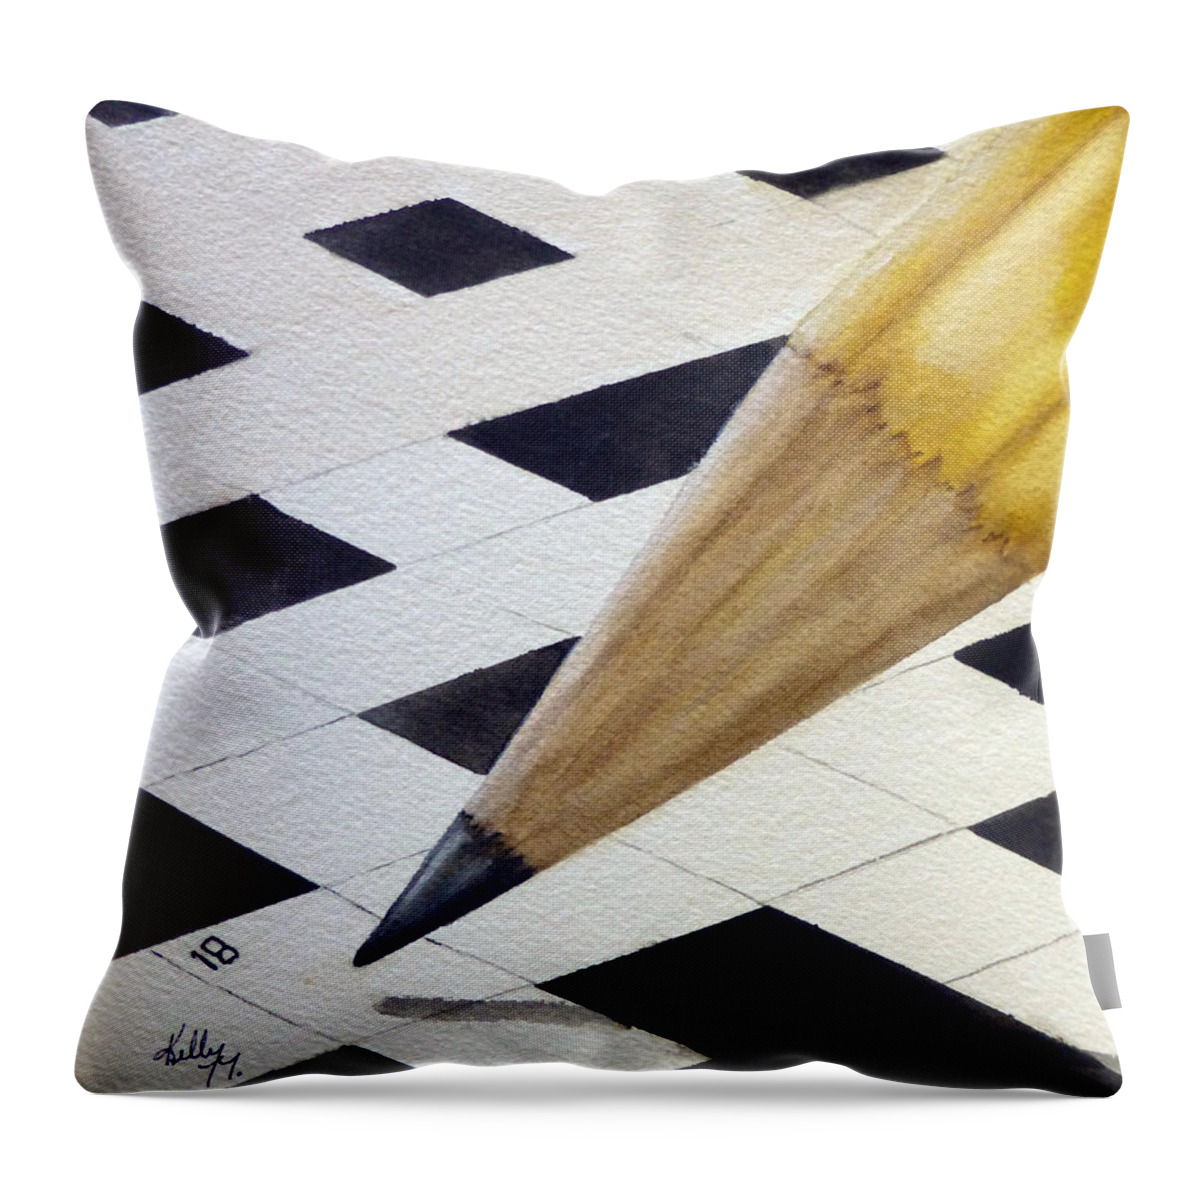 Crossword Throw Pillow featuring the painting Puzzle and Pencil by Kelly Mills